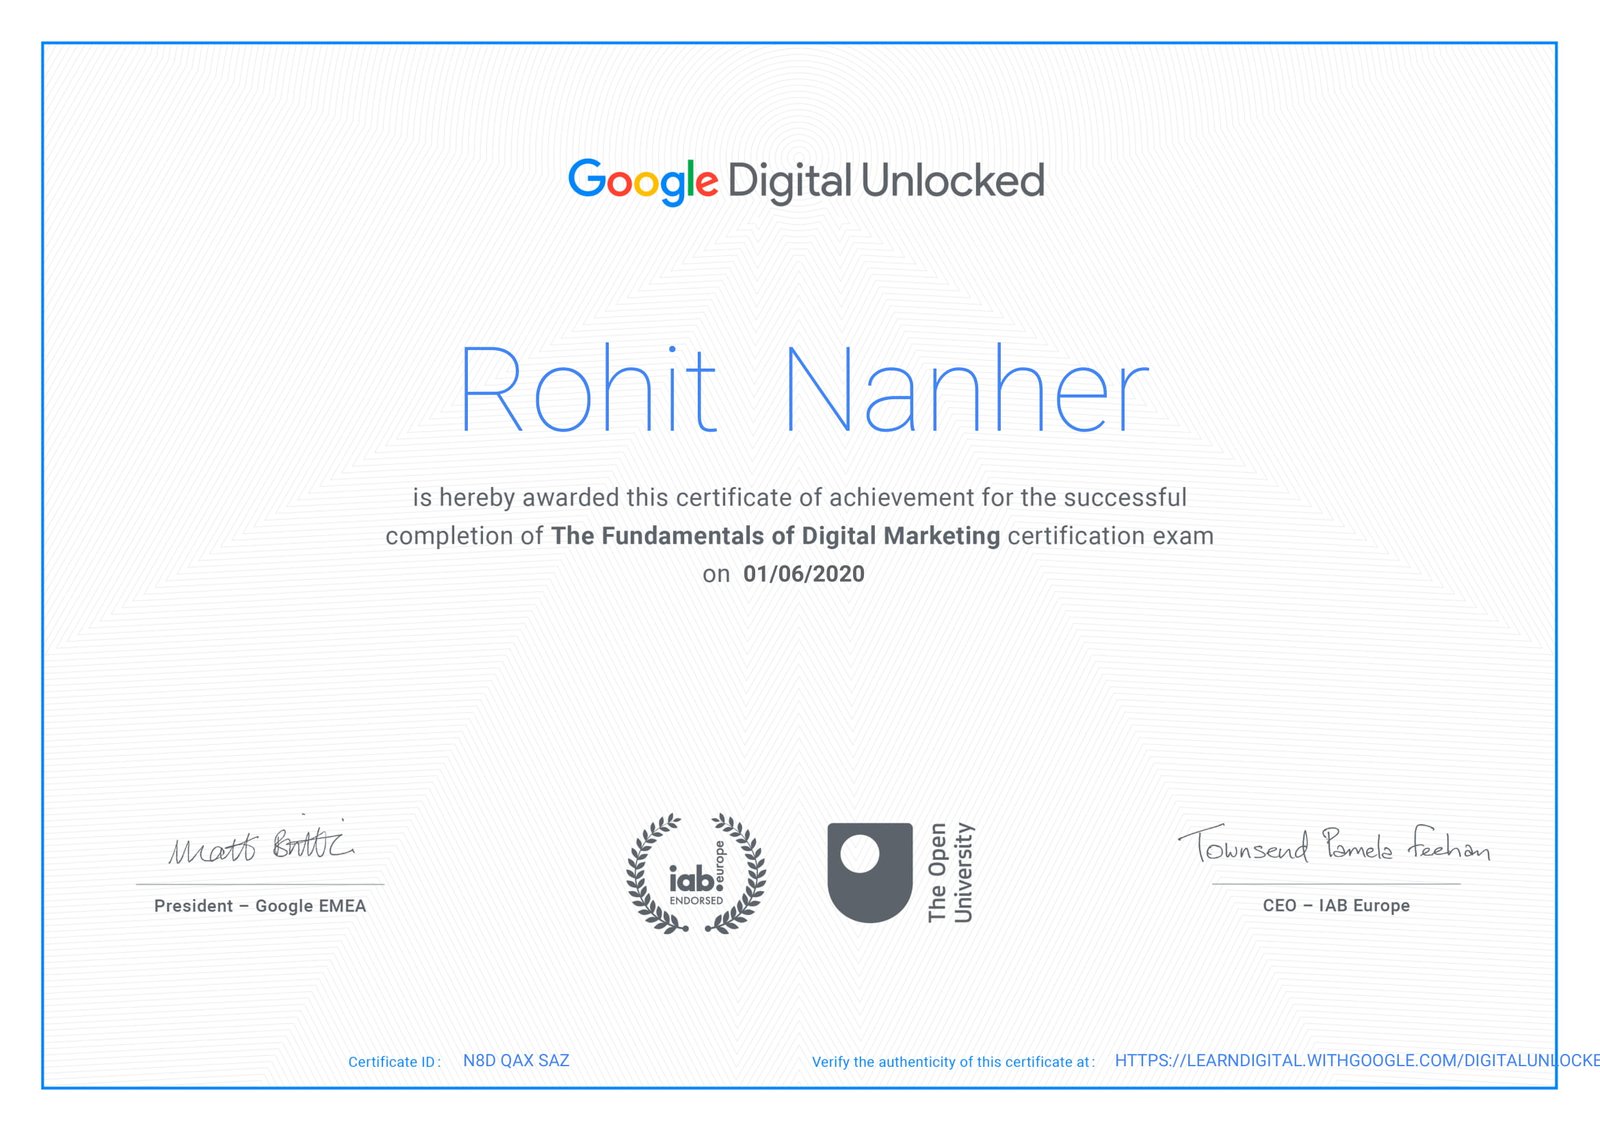 Rohit Nanher, completed fundamentals of digital marketing certification exam